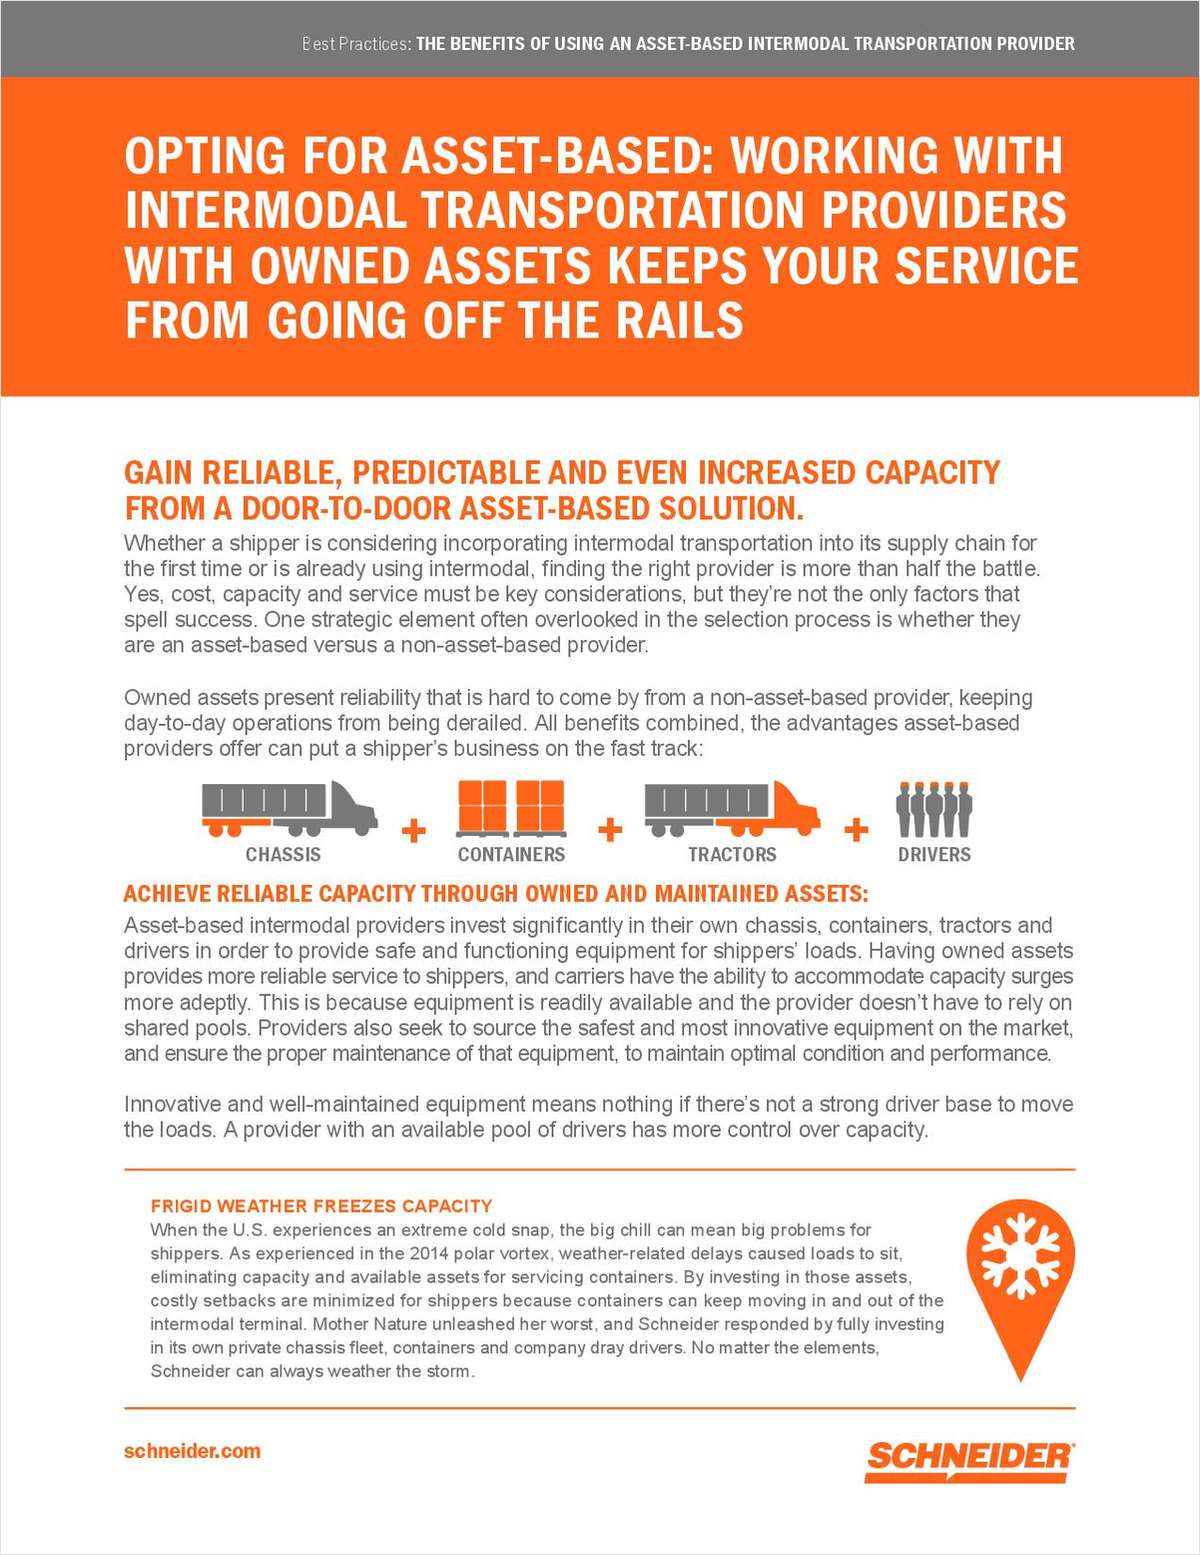 What is an Asset-Based Transportation Provider? And Why Work with One?